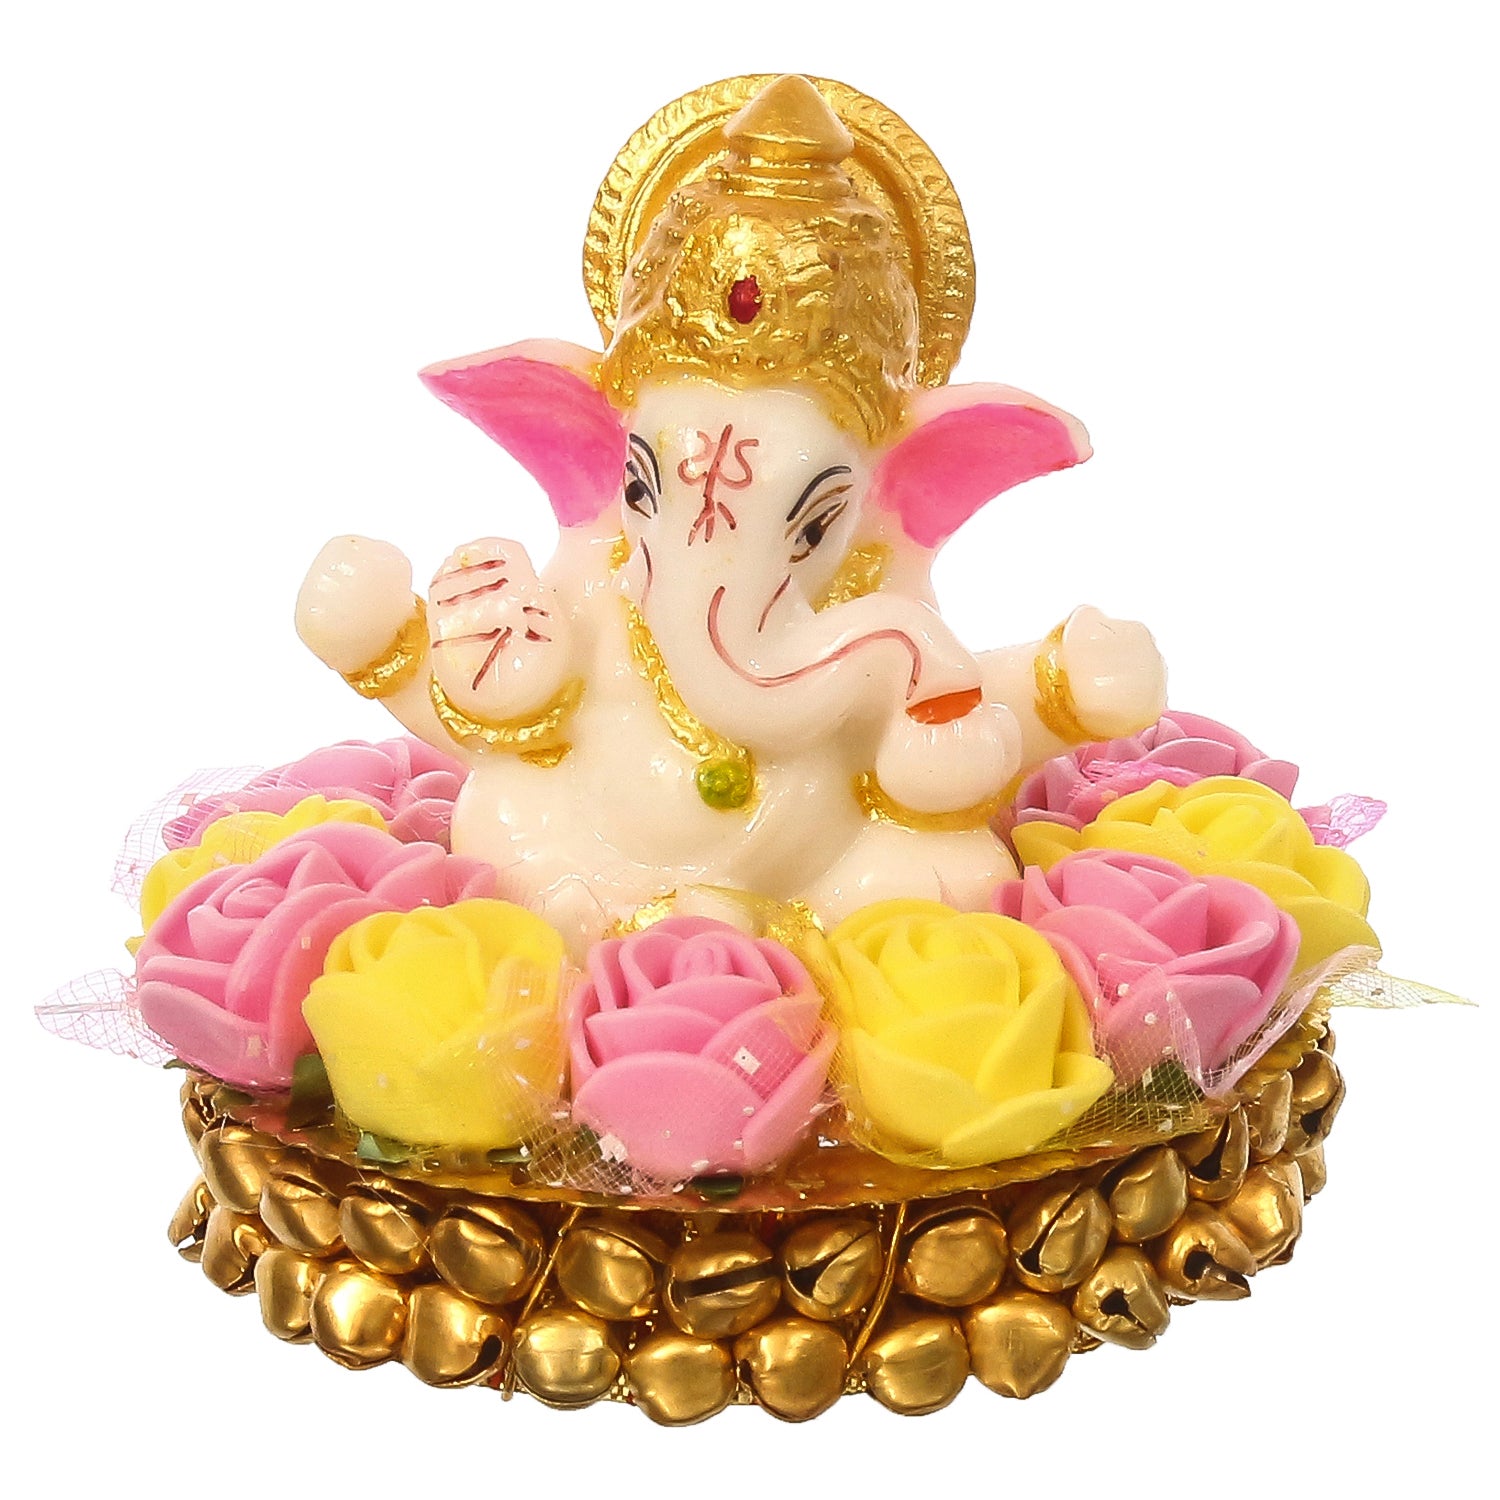 Golden and White Polyresin Lord Ganesha Idol on Decorative Handcrafted Plate with Pink and Yellow Flowers 2